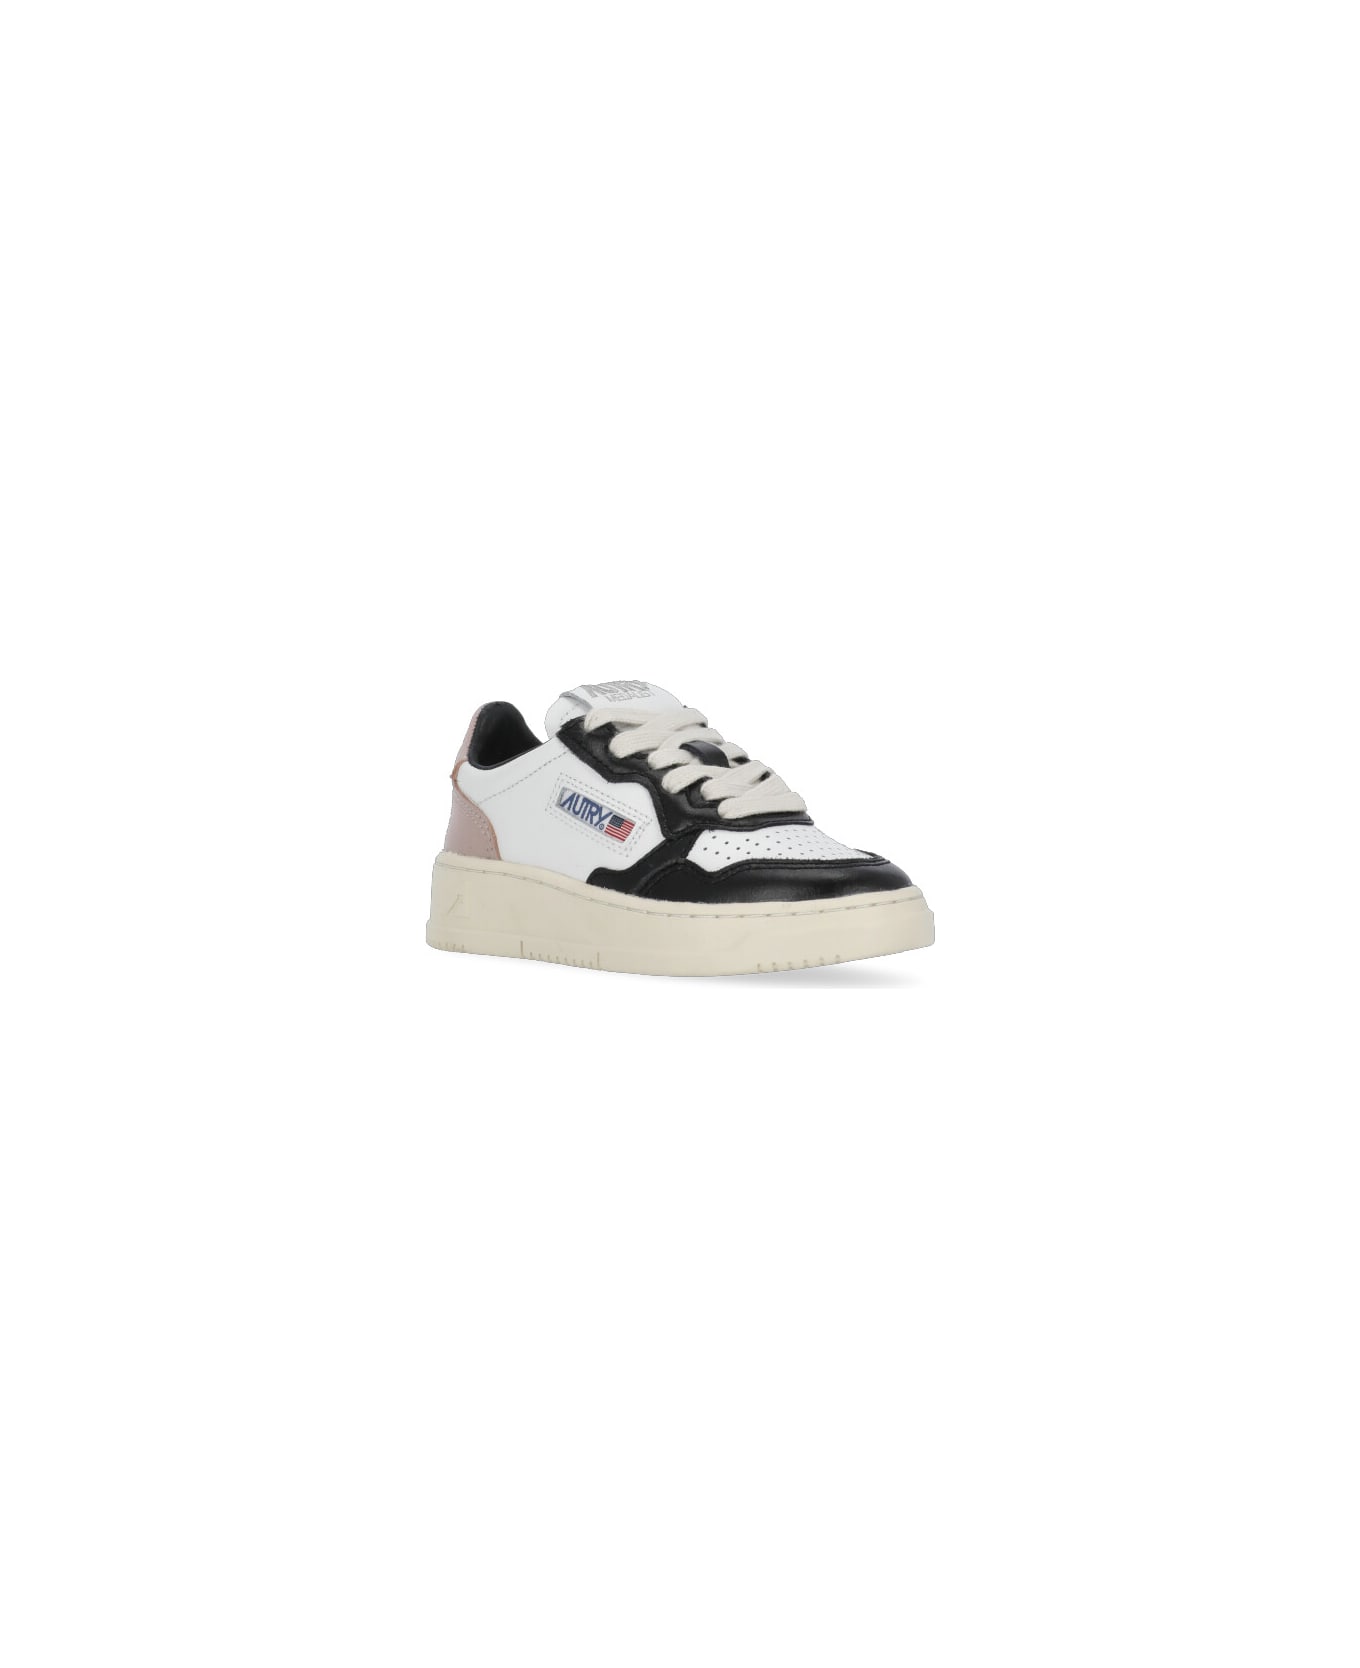 Autry Low Medalist Sneakers - White